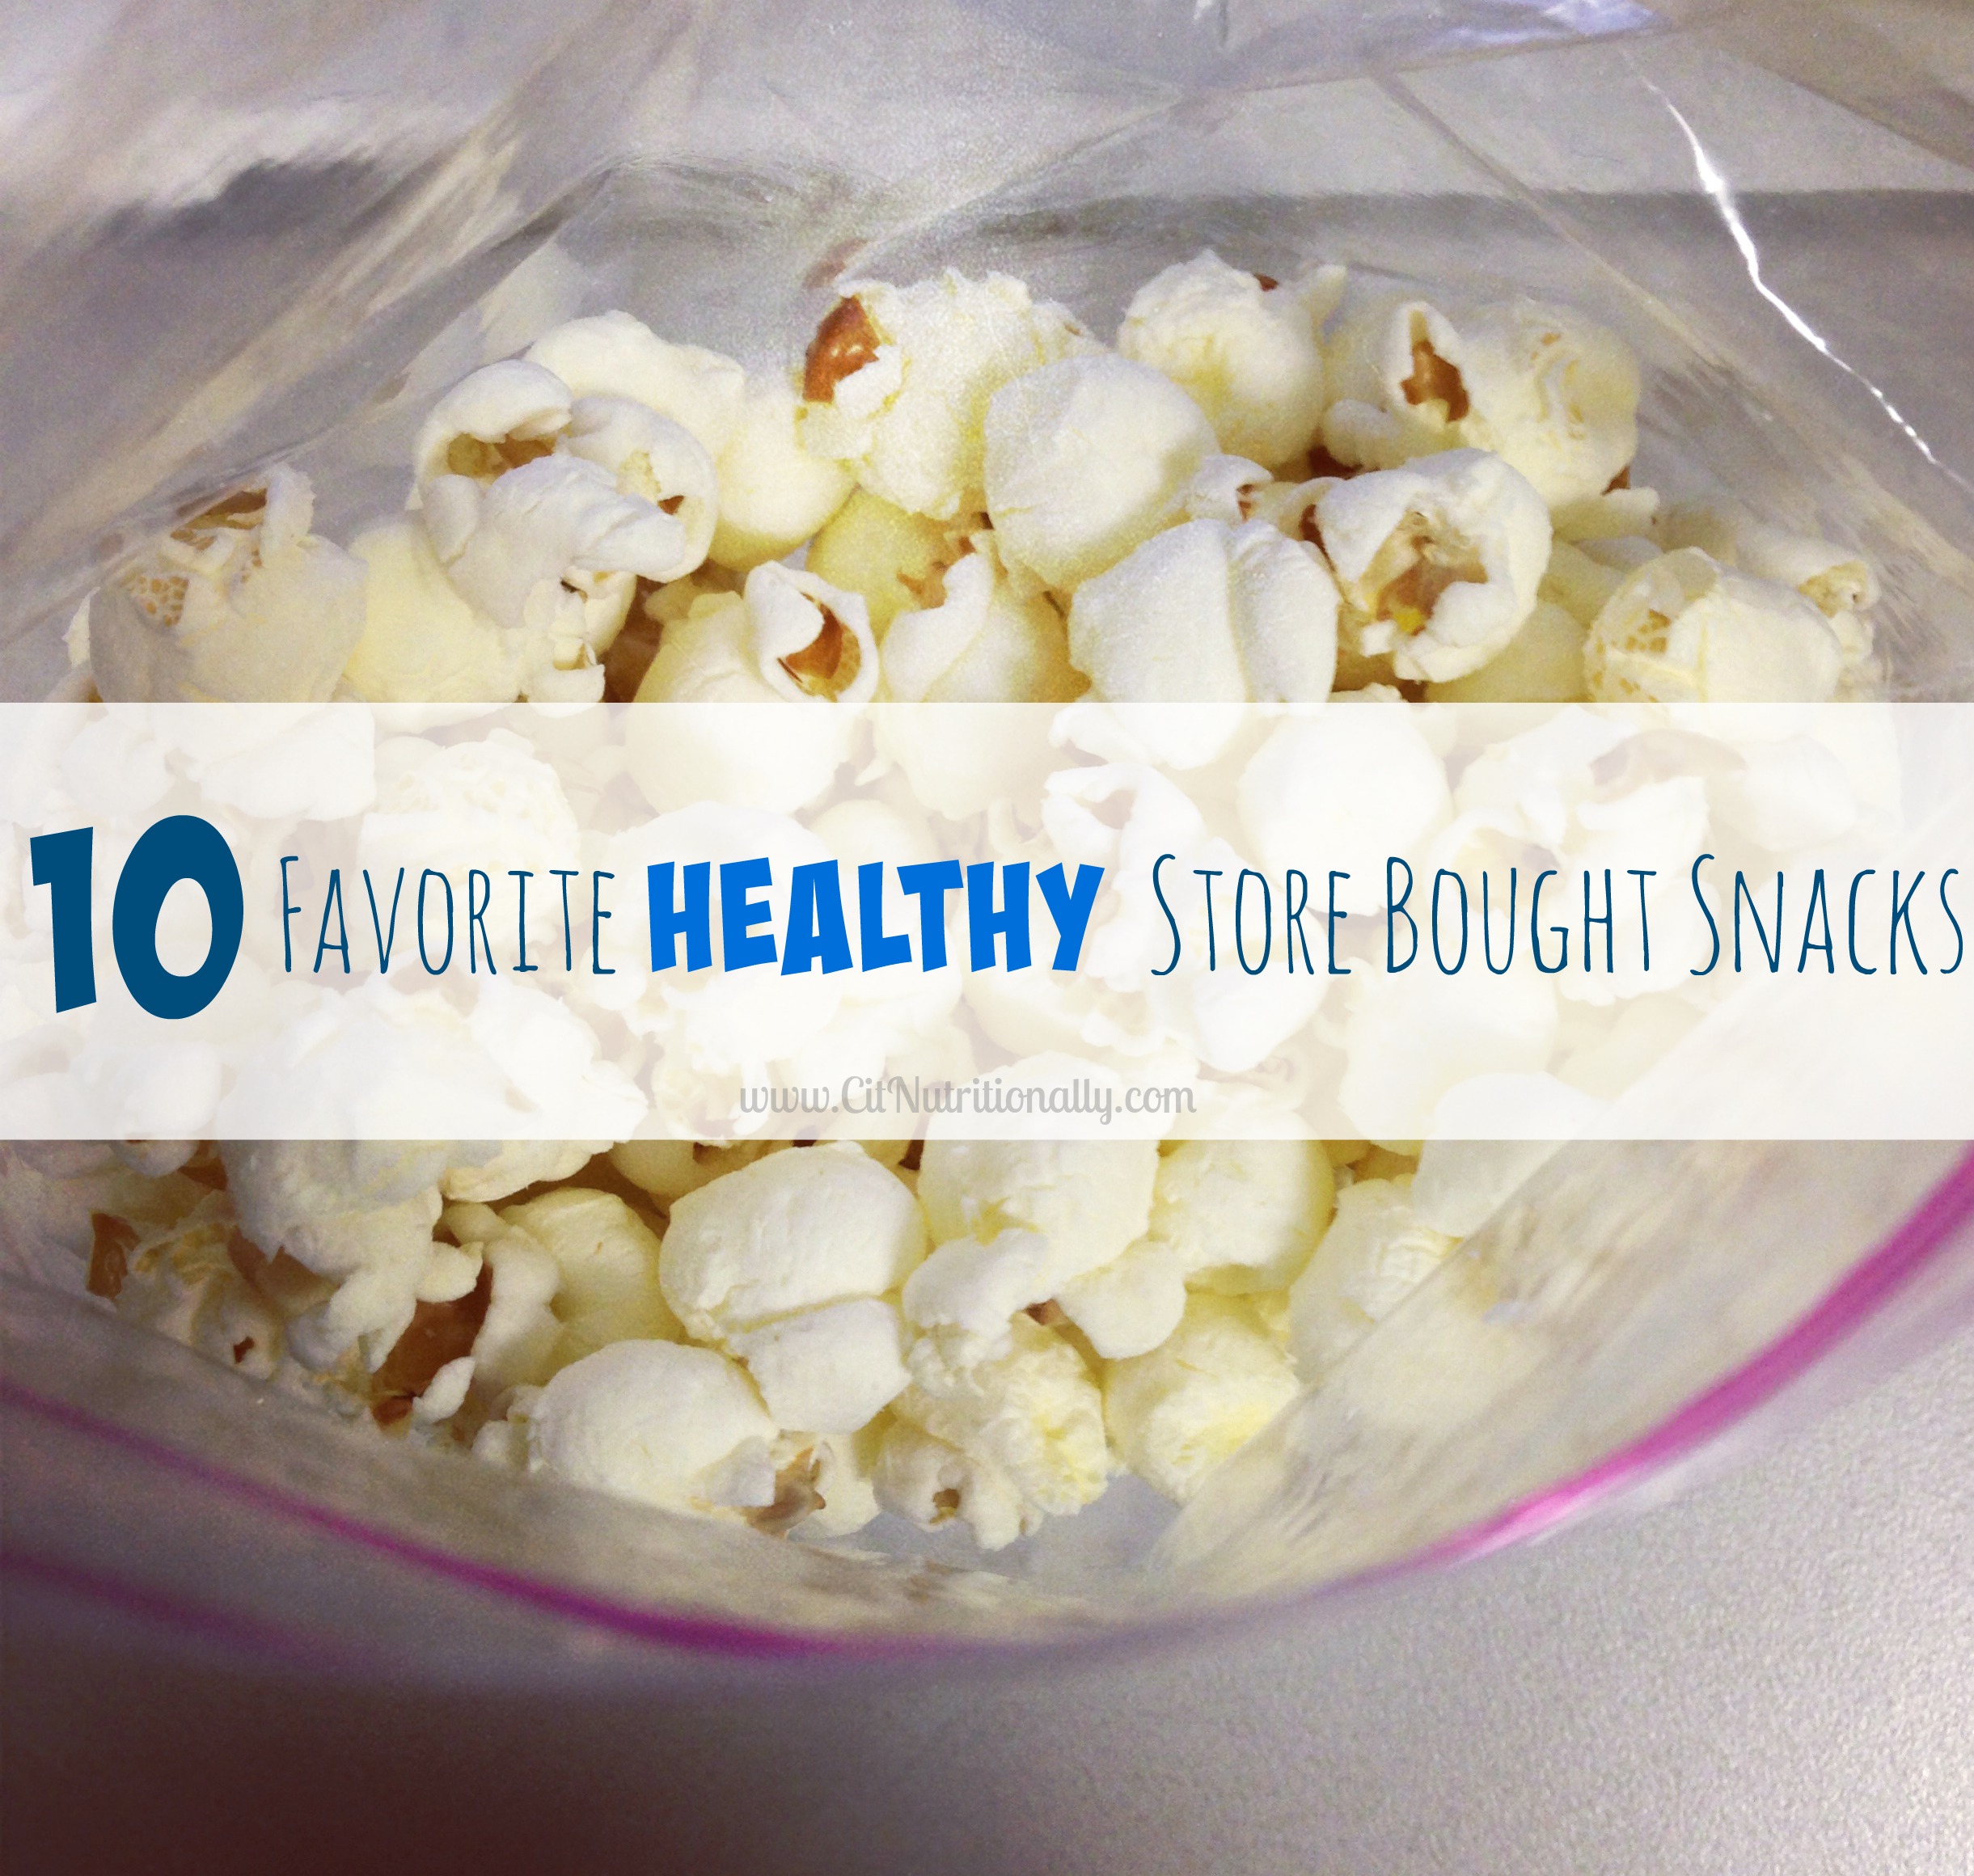 10 Favorite Healthy Store Bought Snacks | C it Nutritionally